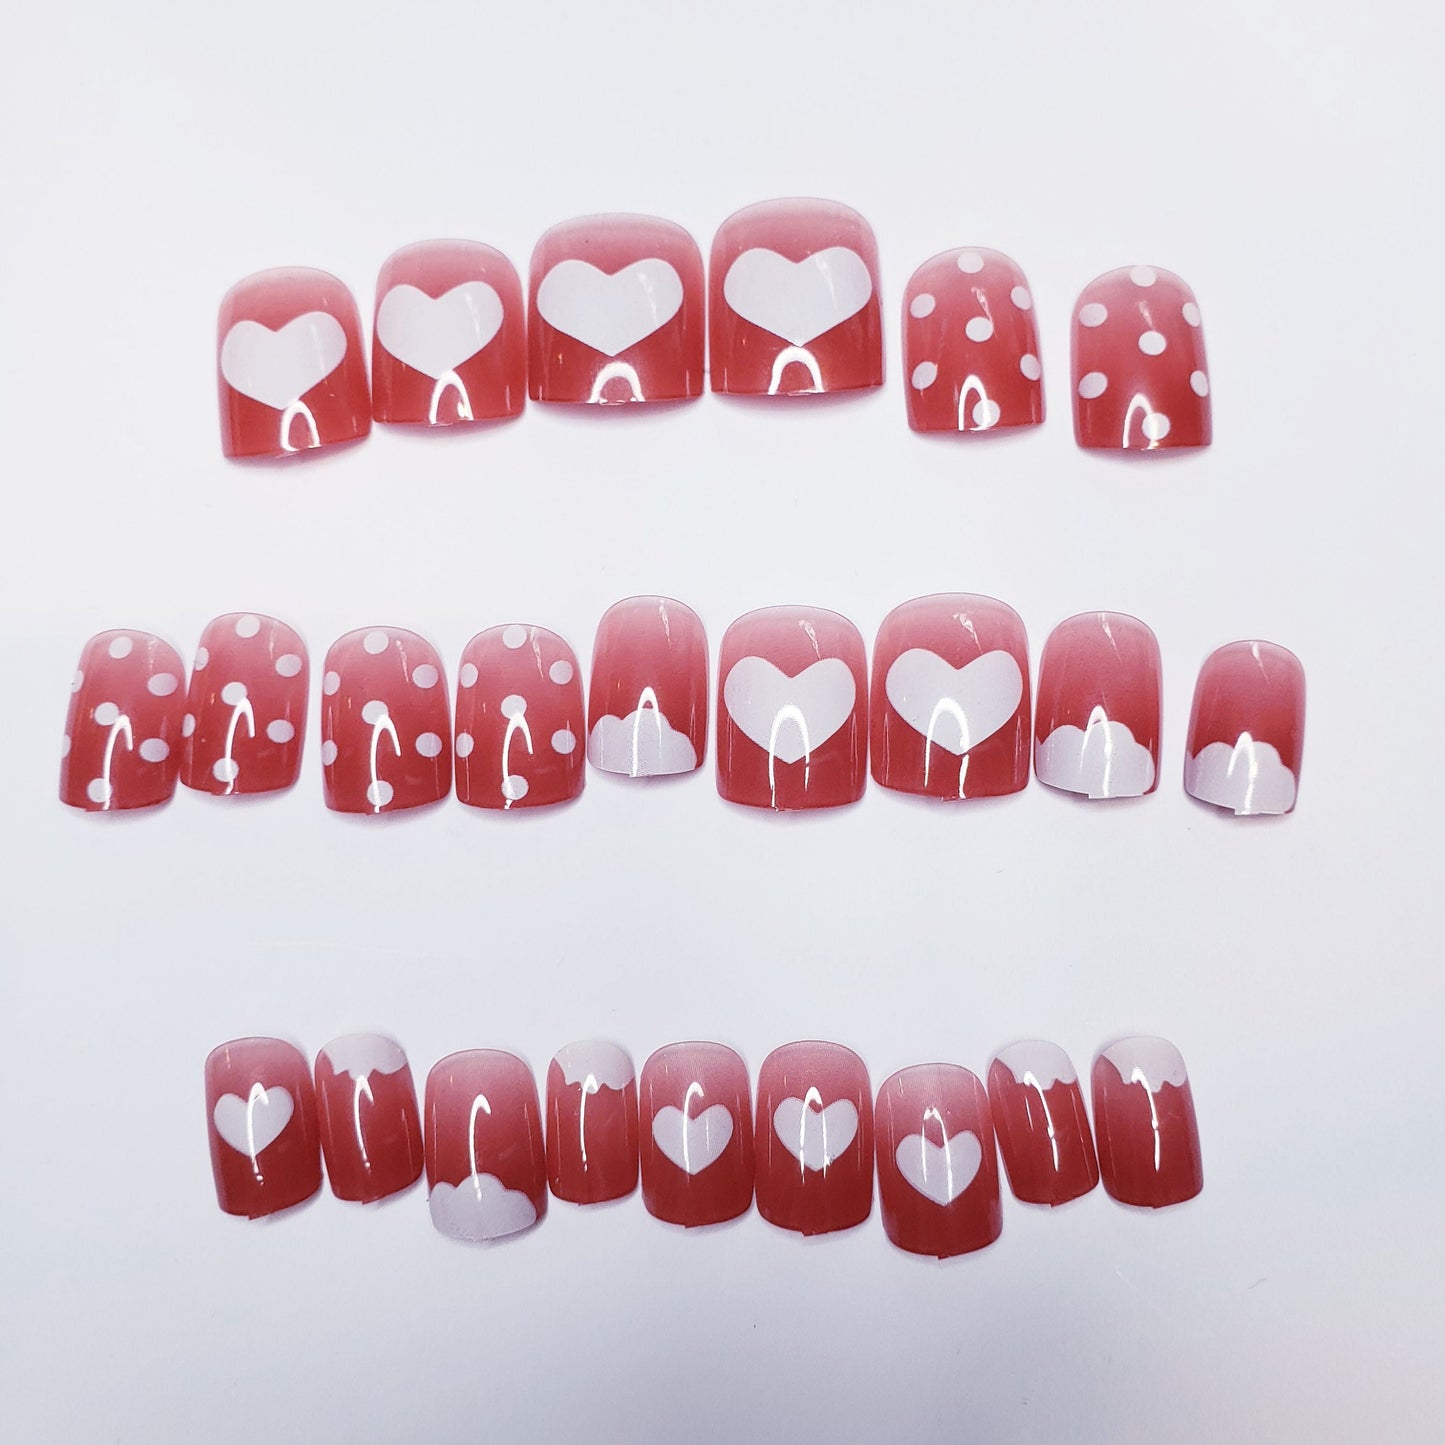 24 Short Press On Nails Hearts polka dots red glue on cute kawaii rosy clouds white jelly